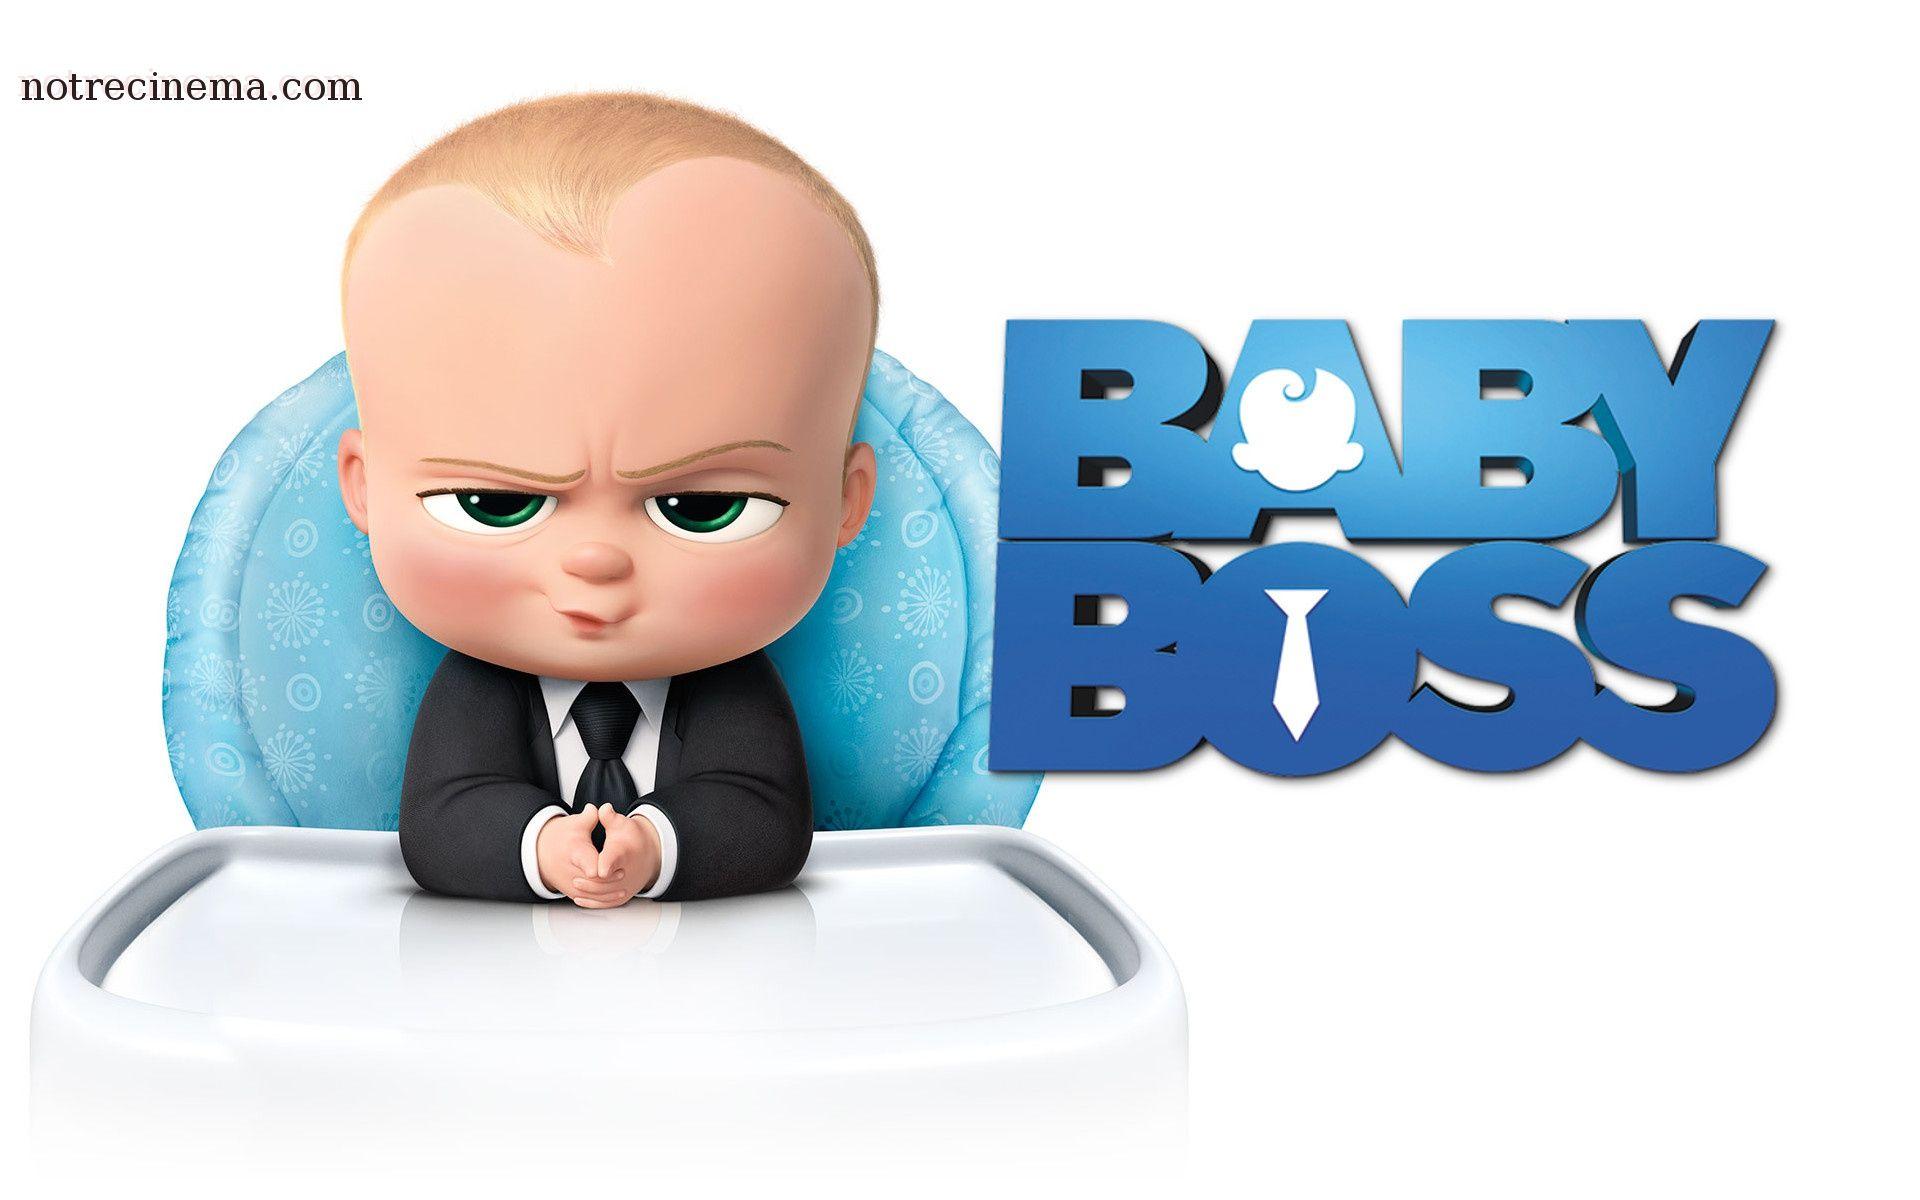 Boss Baby Wallpapers - Top Free Boss Baby Backgrounds ...